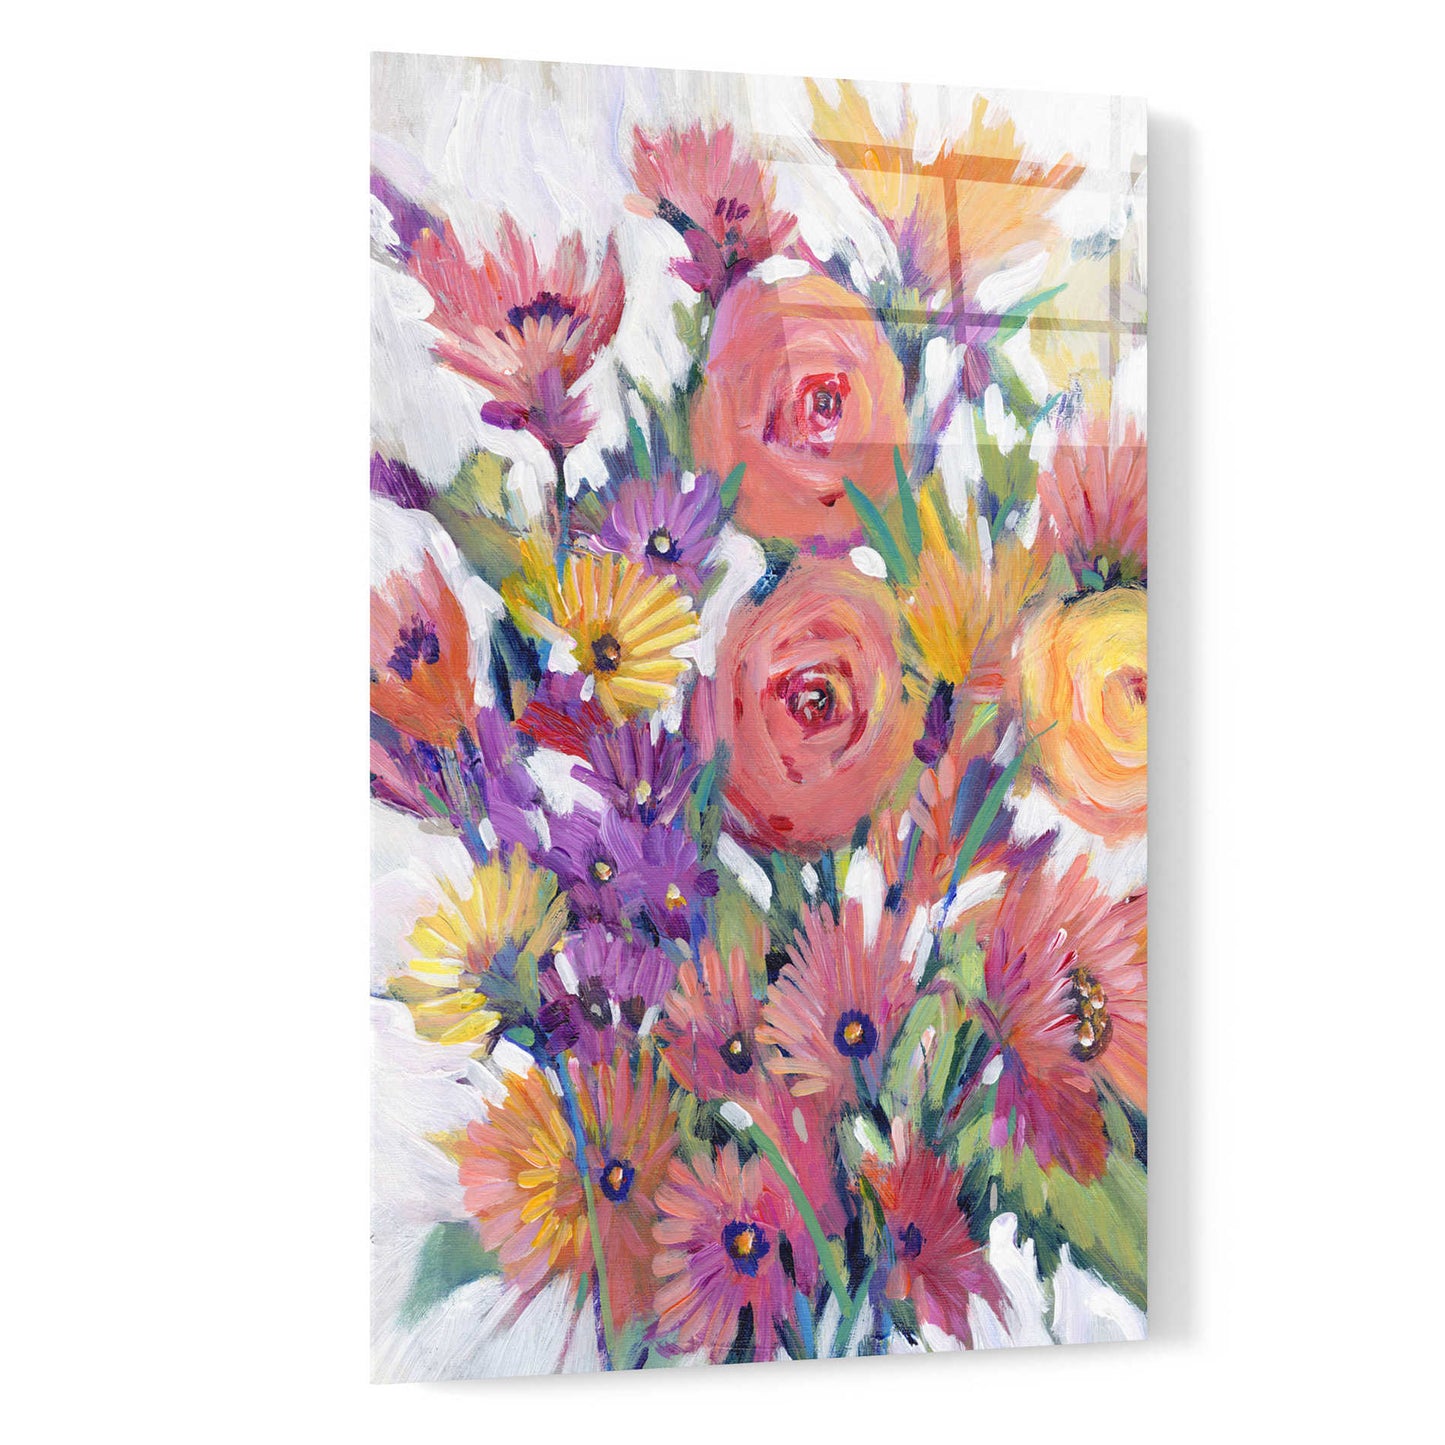 Epic Art 'Spring in Bloom I' by Tim O'Toole, Acrylic Glass Wall Art,16x24